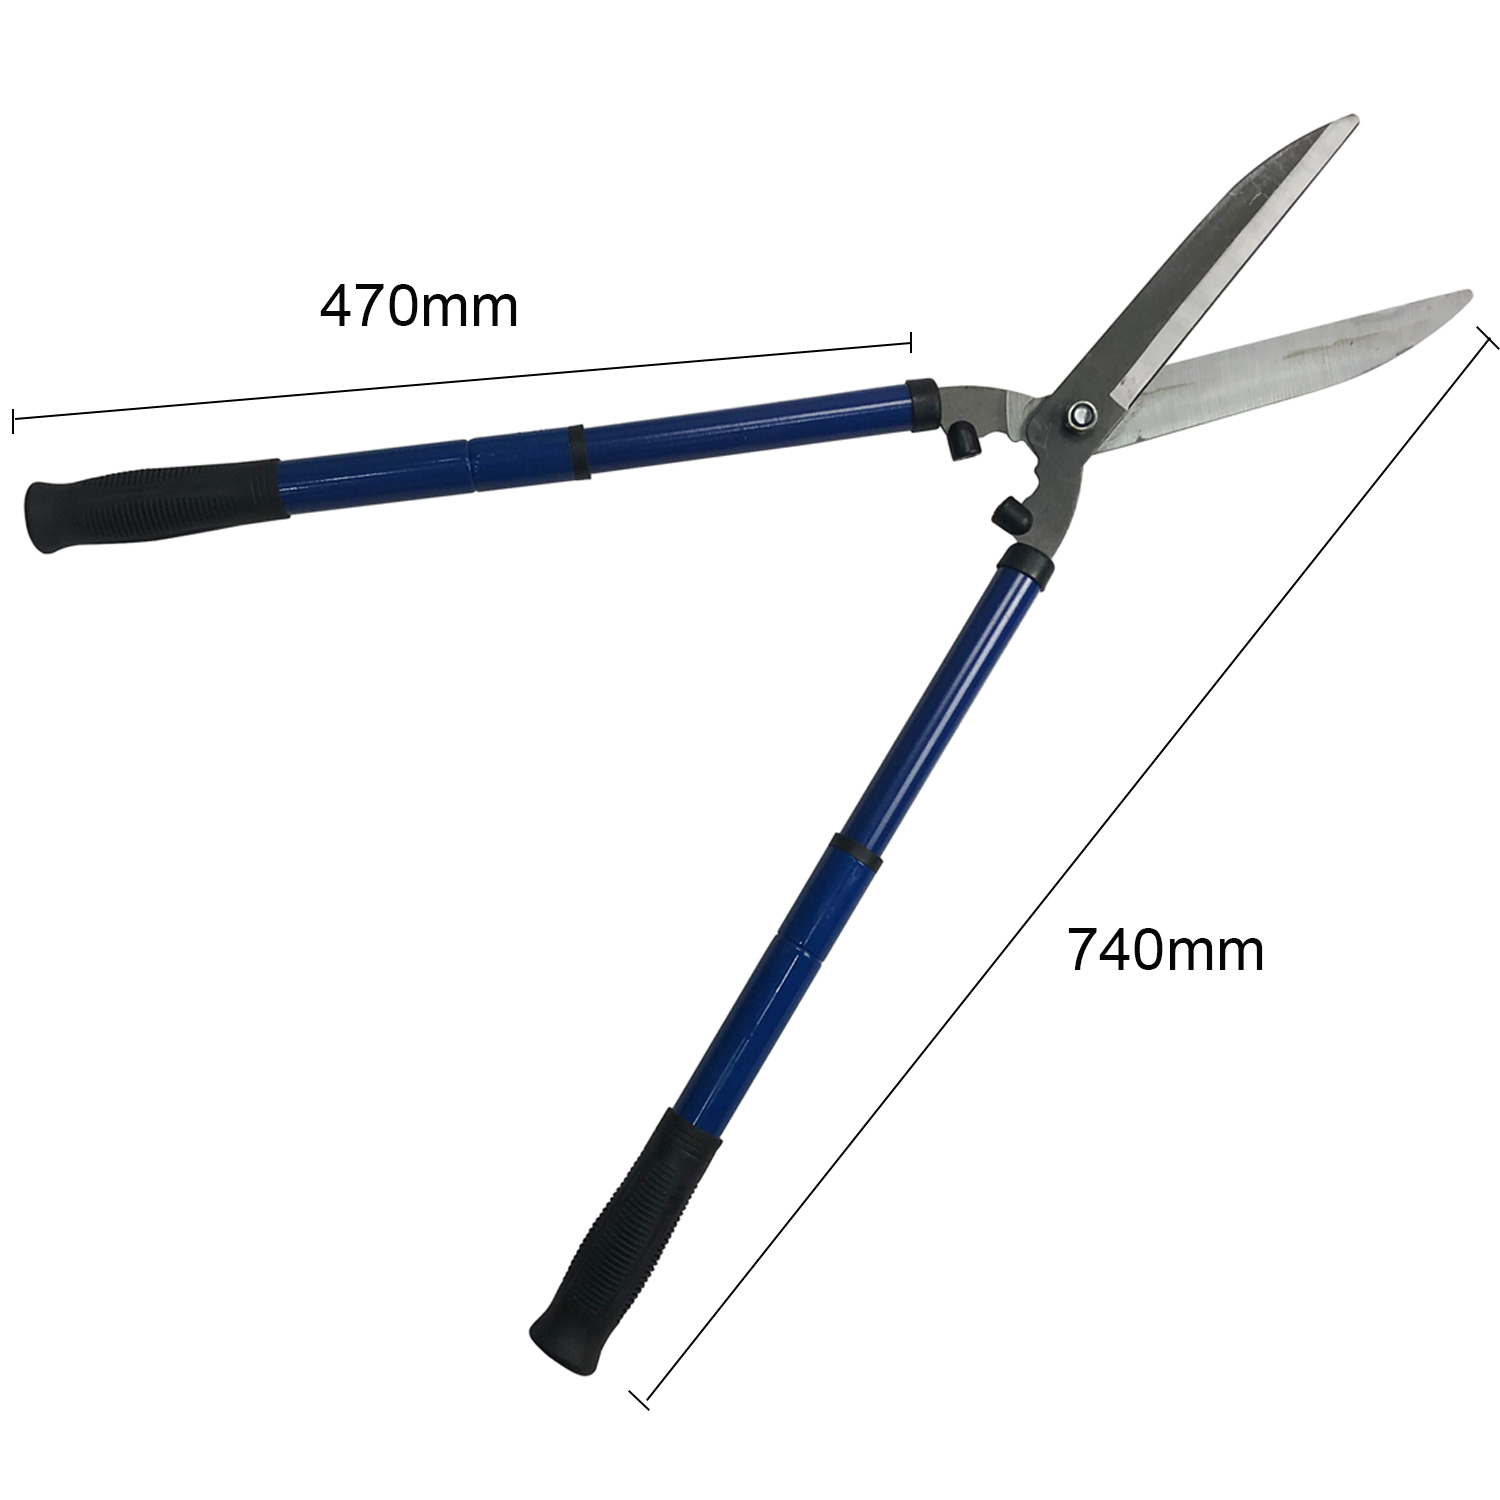 570mm-740mm (about 22 inch-29inch) Adjustable Handgrip Hedge shears Manual Hedge Clippers For Trimming Borders Topiaries Boxwood Decorative Grasses